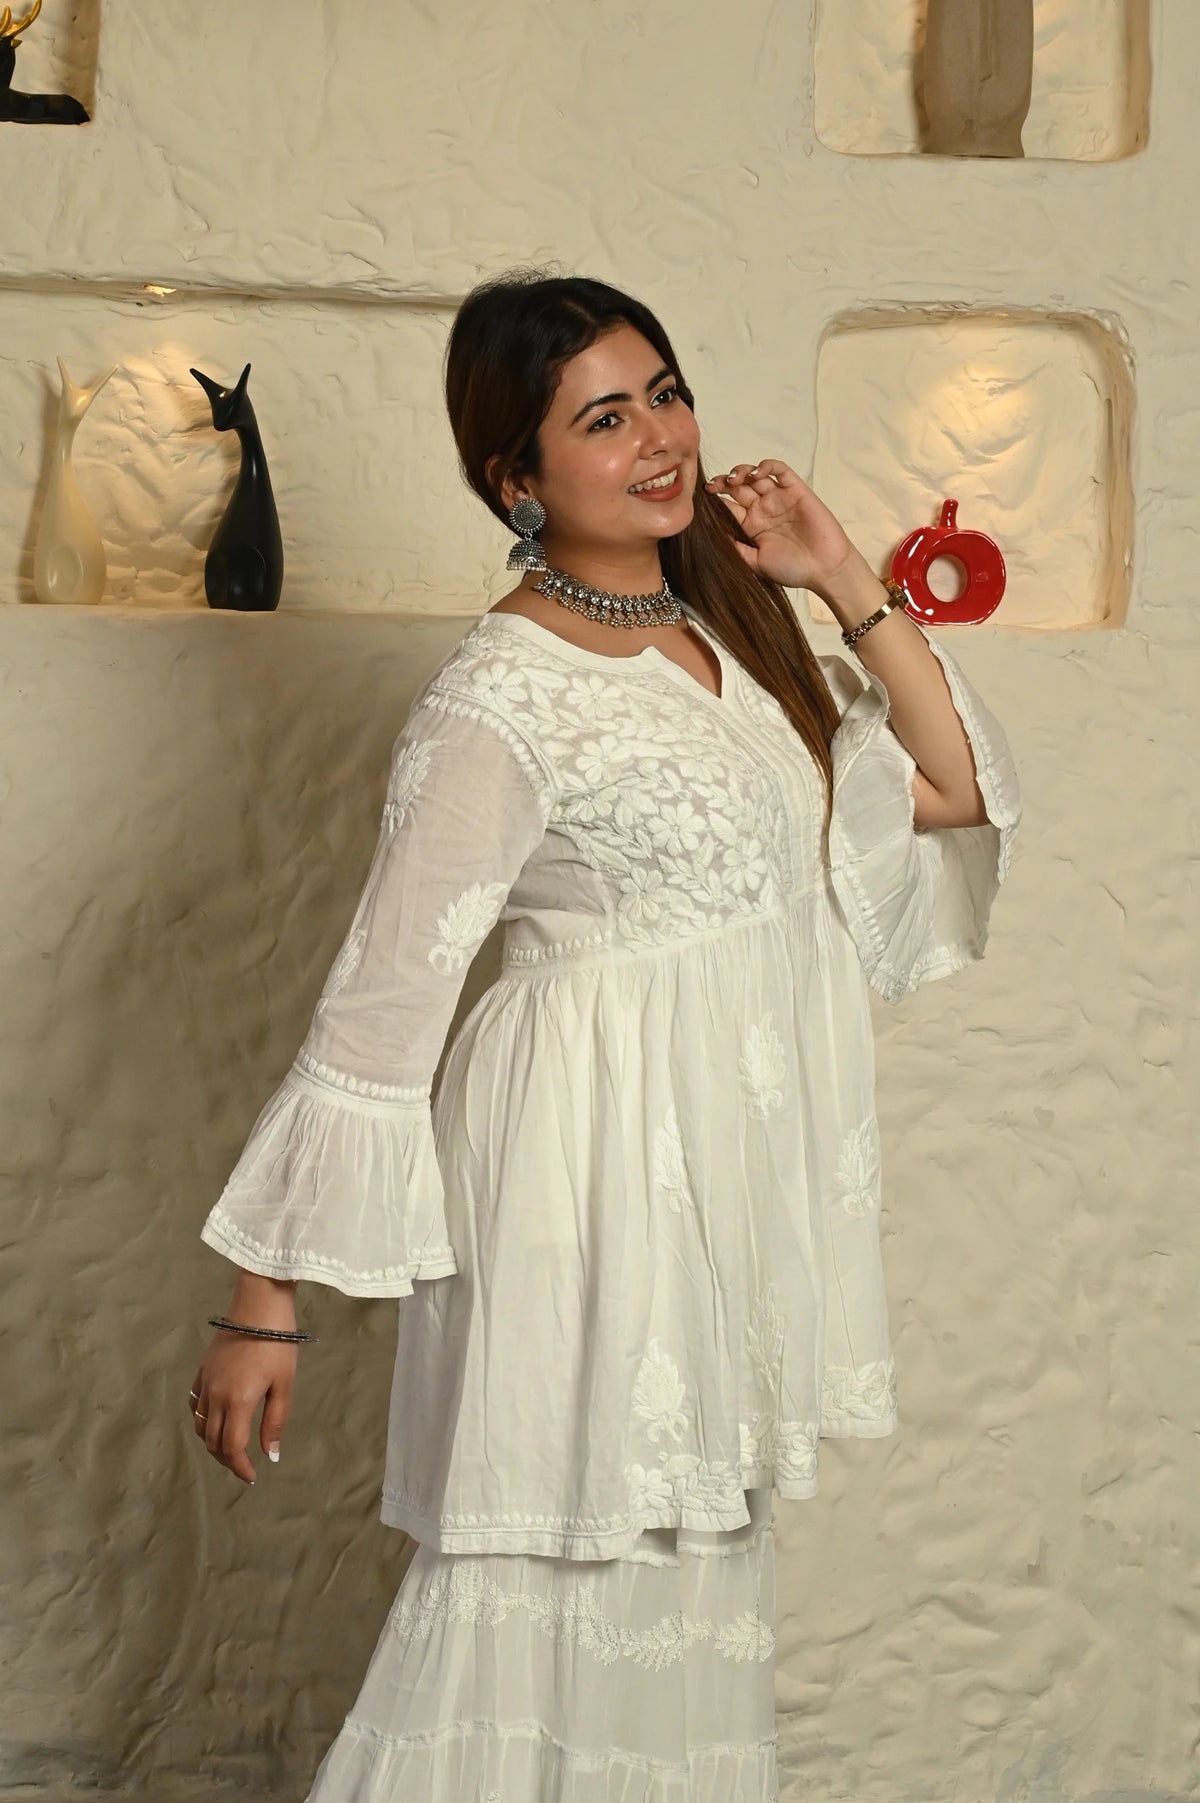 Masakali Mul Cotton Short Top With Bell Sleeves